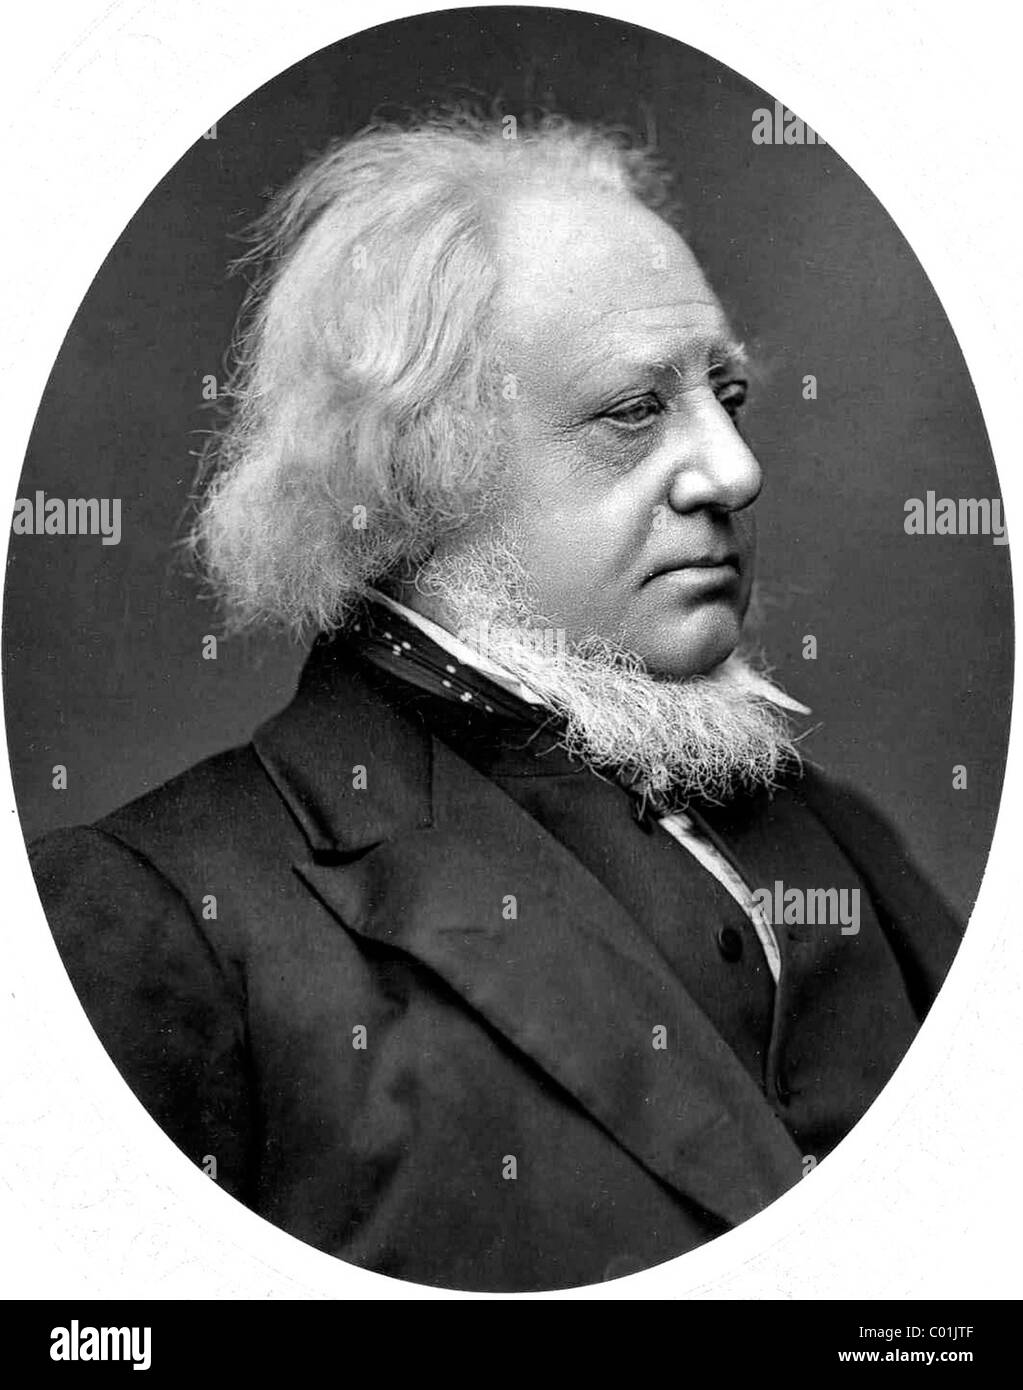 HENRY COLE (1808-1882) English civil servant, inventor and producer of the world's first commercial Christmas card Stock Photo